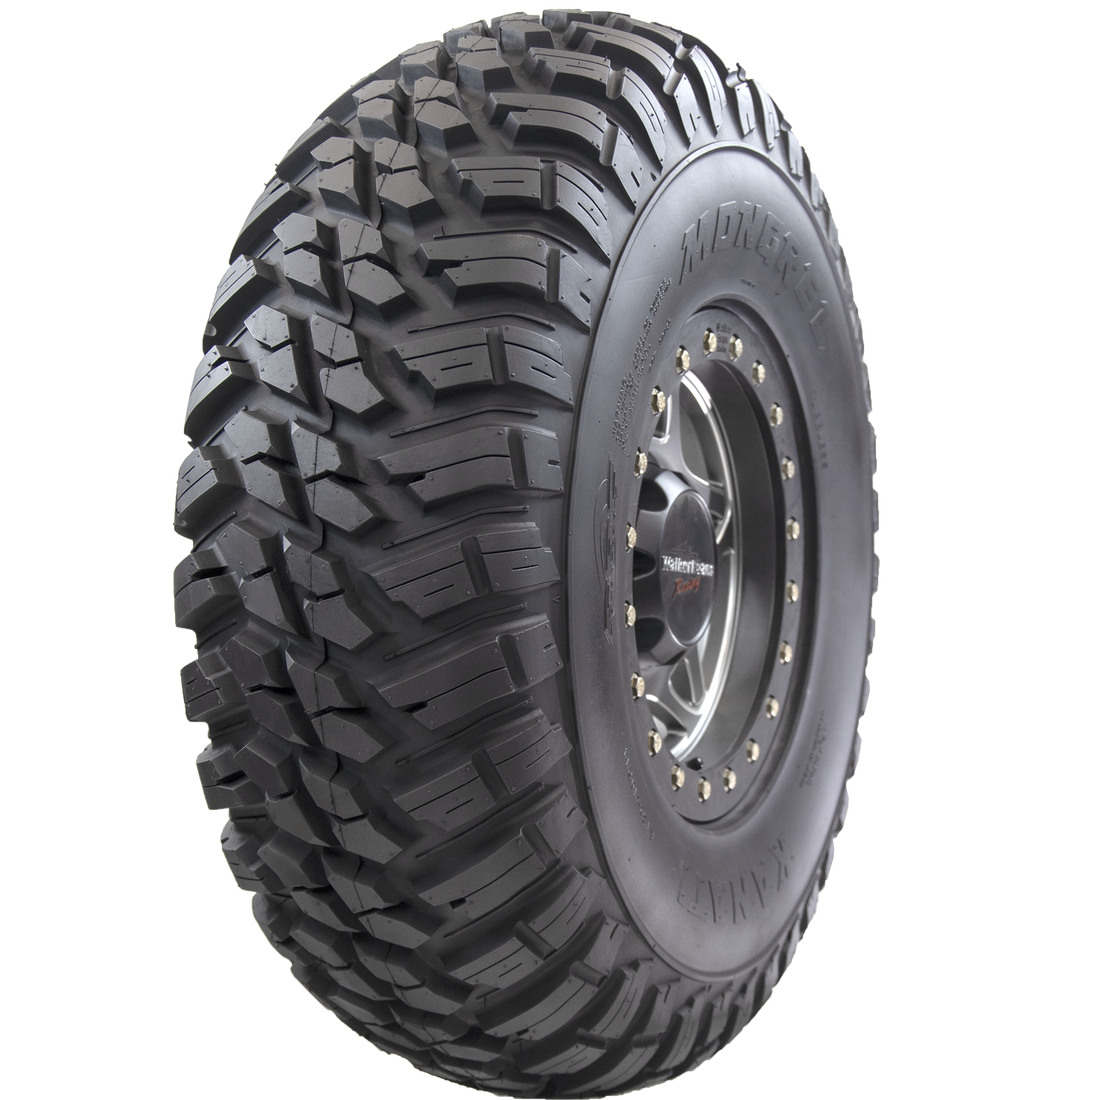 Angle view of Mongrel ATV/UTV tire, showcasing the robust tread, partial sidewall, and rim. This tire is built to handle high horsepower and speed capabilities of modern UTVs and SxS.